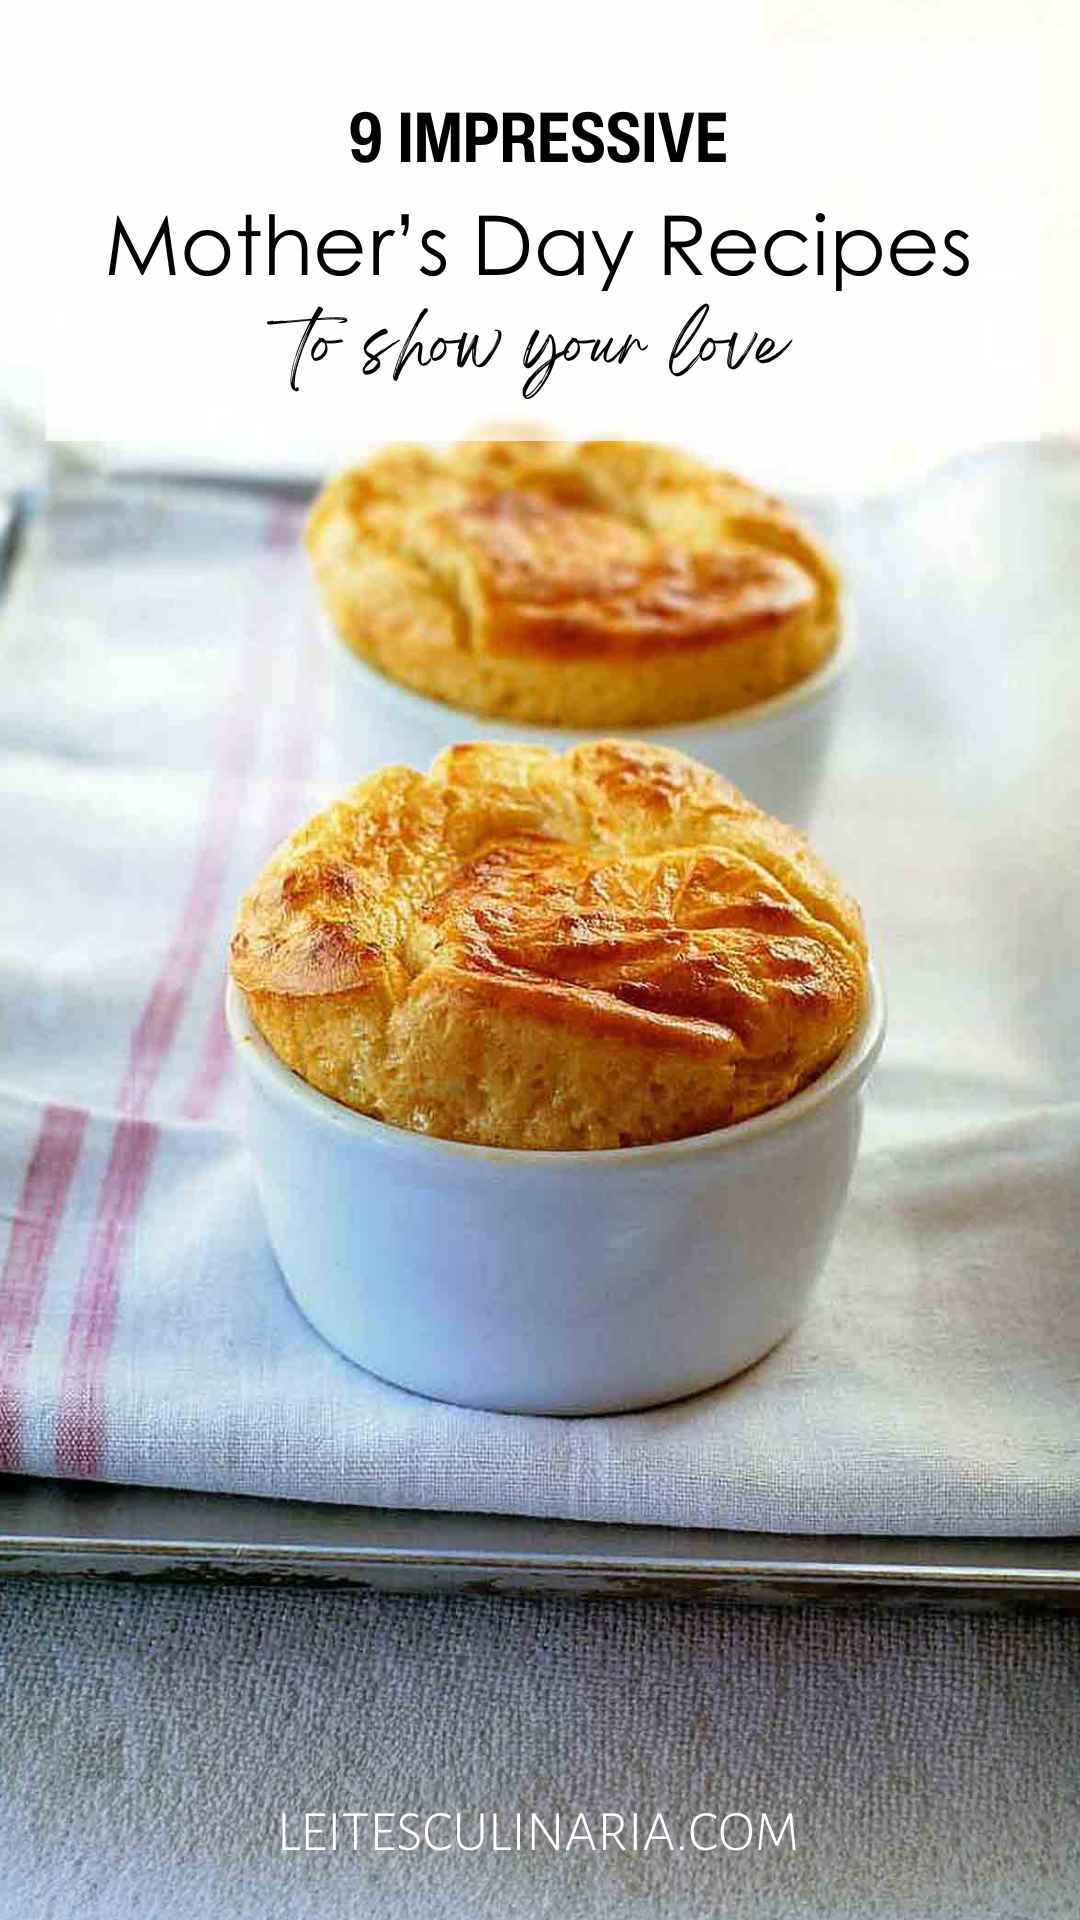 Two souffles in individual baking cups.